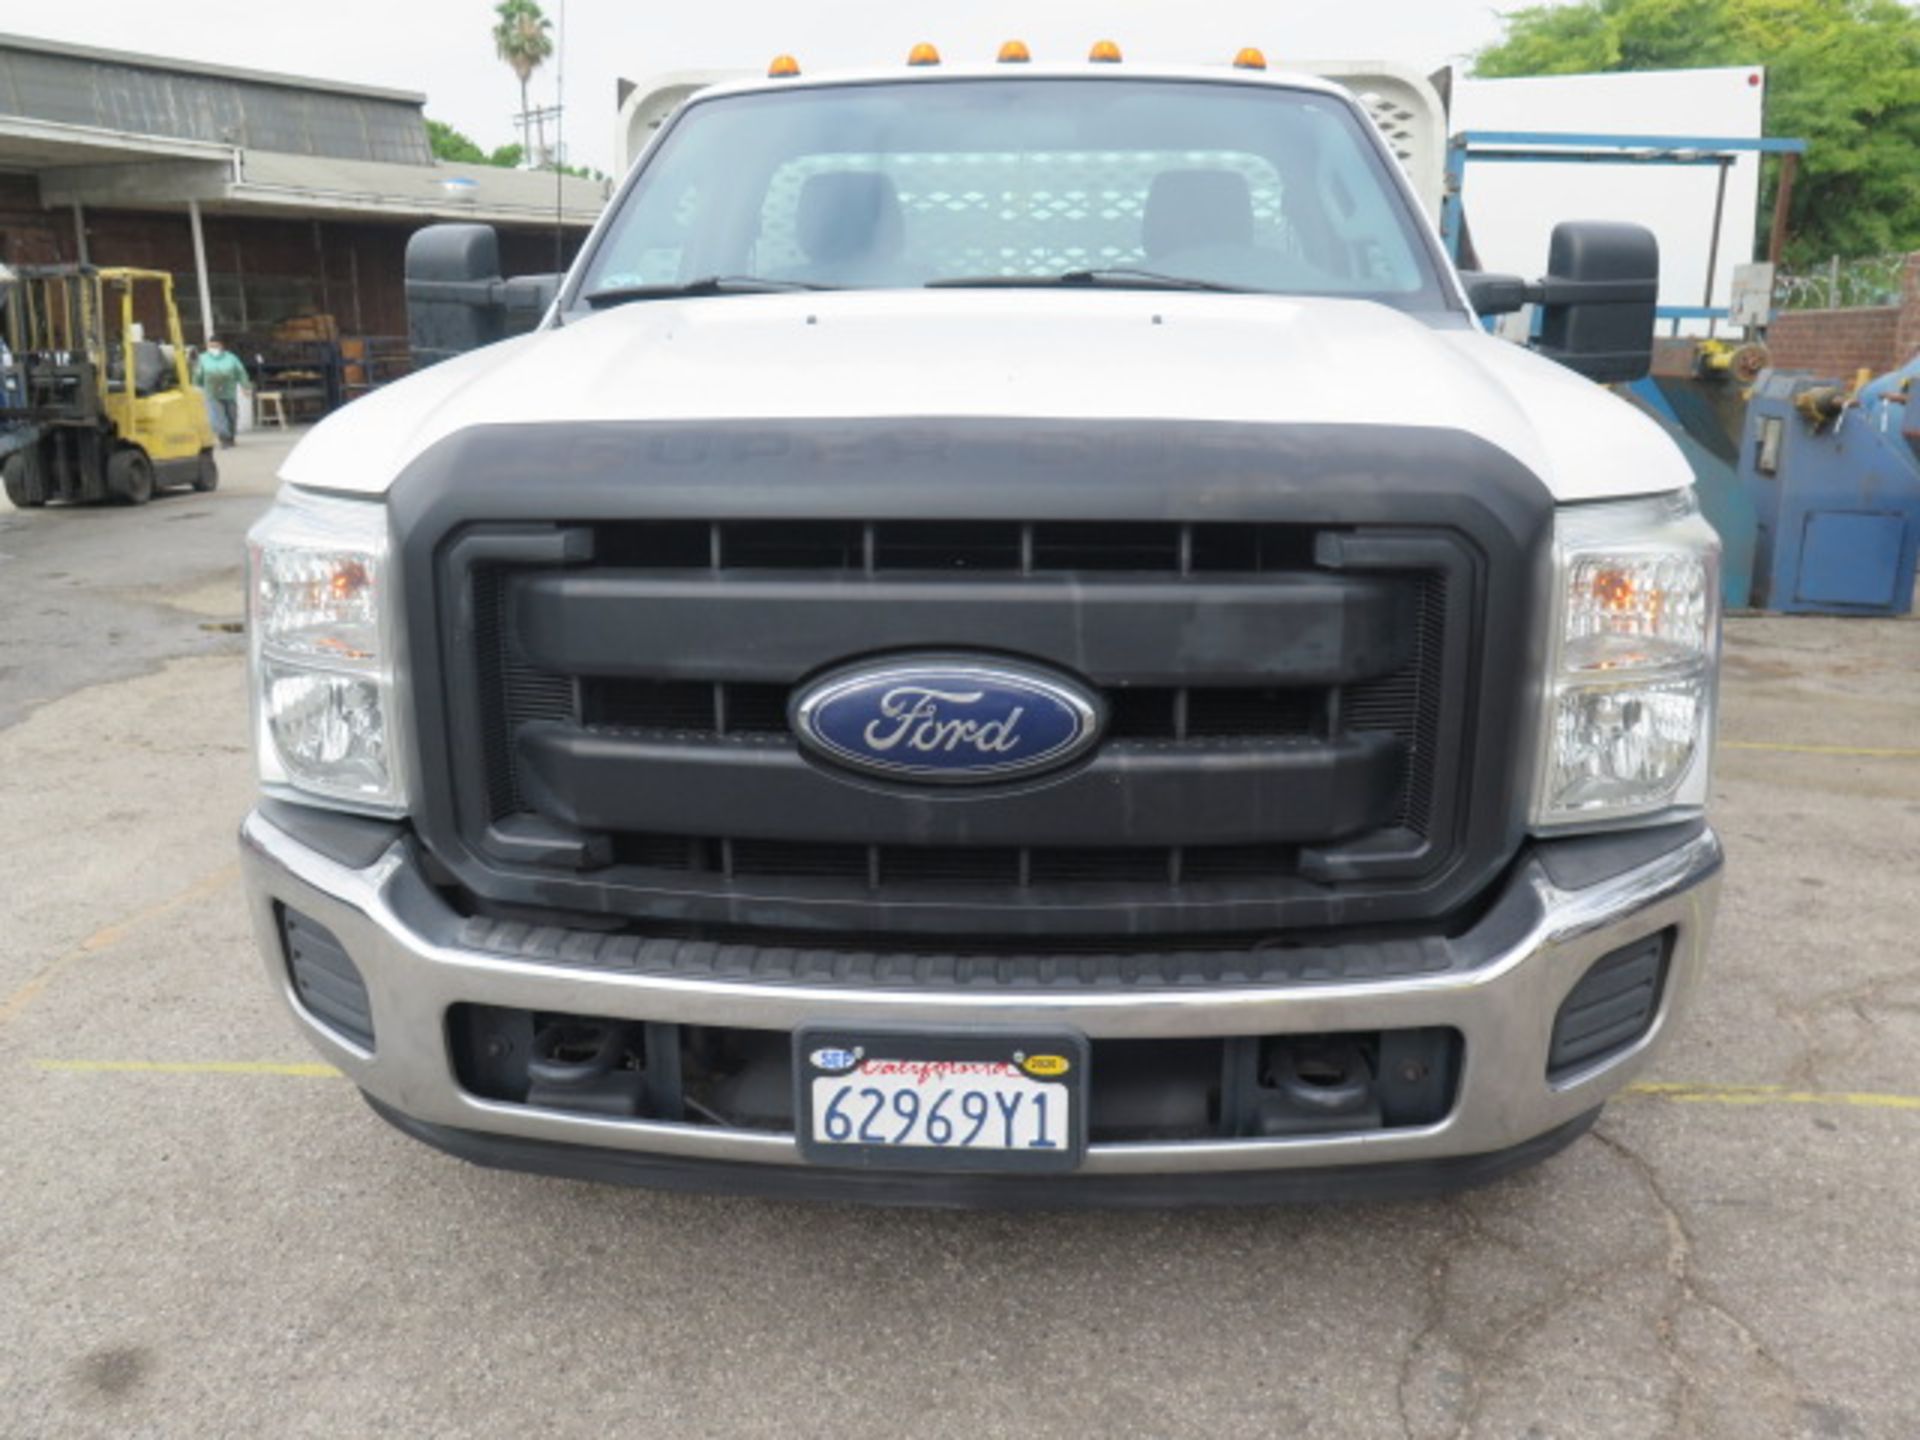 2015 Ford F-350 Super Duty 12’ Stake-Bed Truck Lisc# 62969Y1 w/ 6.7L Turbo Diesel Power Stroke B20 - Image 25 of 25